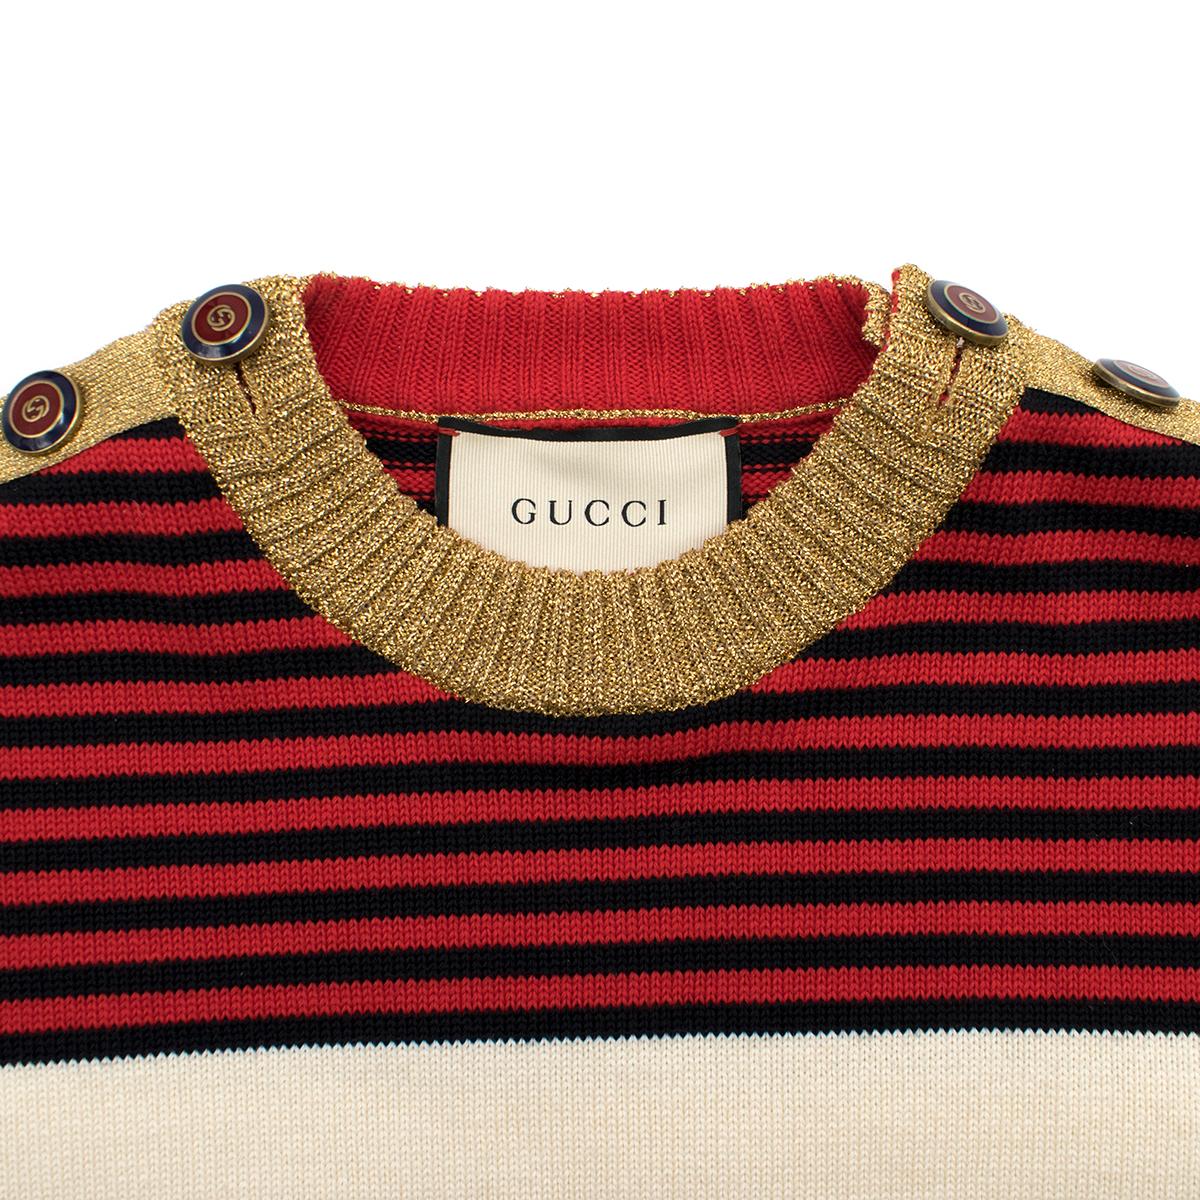 Gucci Metallic Trimmed Logo Intarsia Cotton Sweater US 8 In Excellent Condition For Sale In London, GB